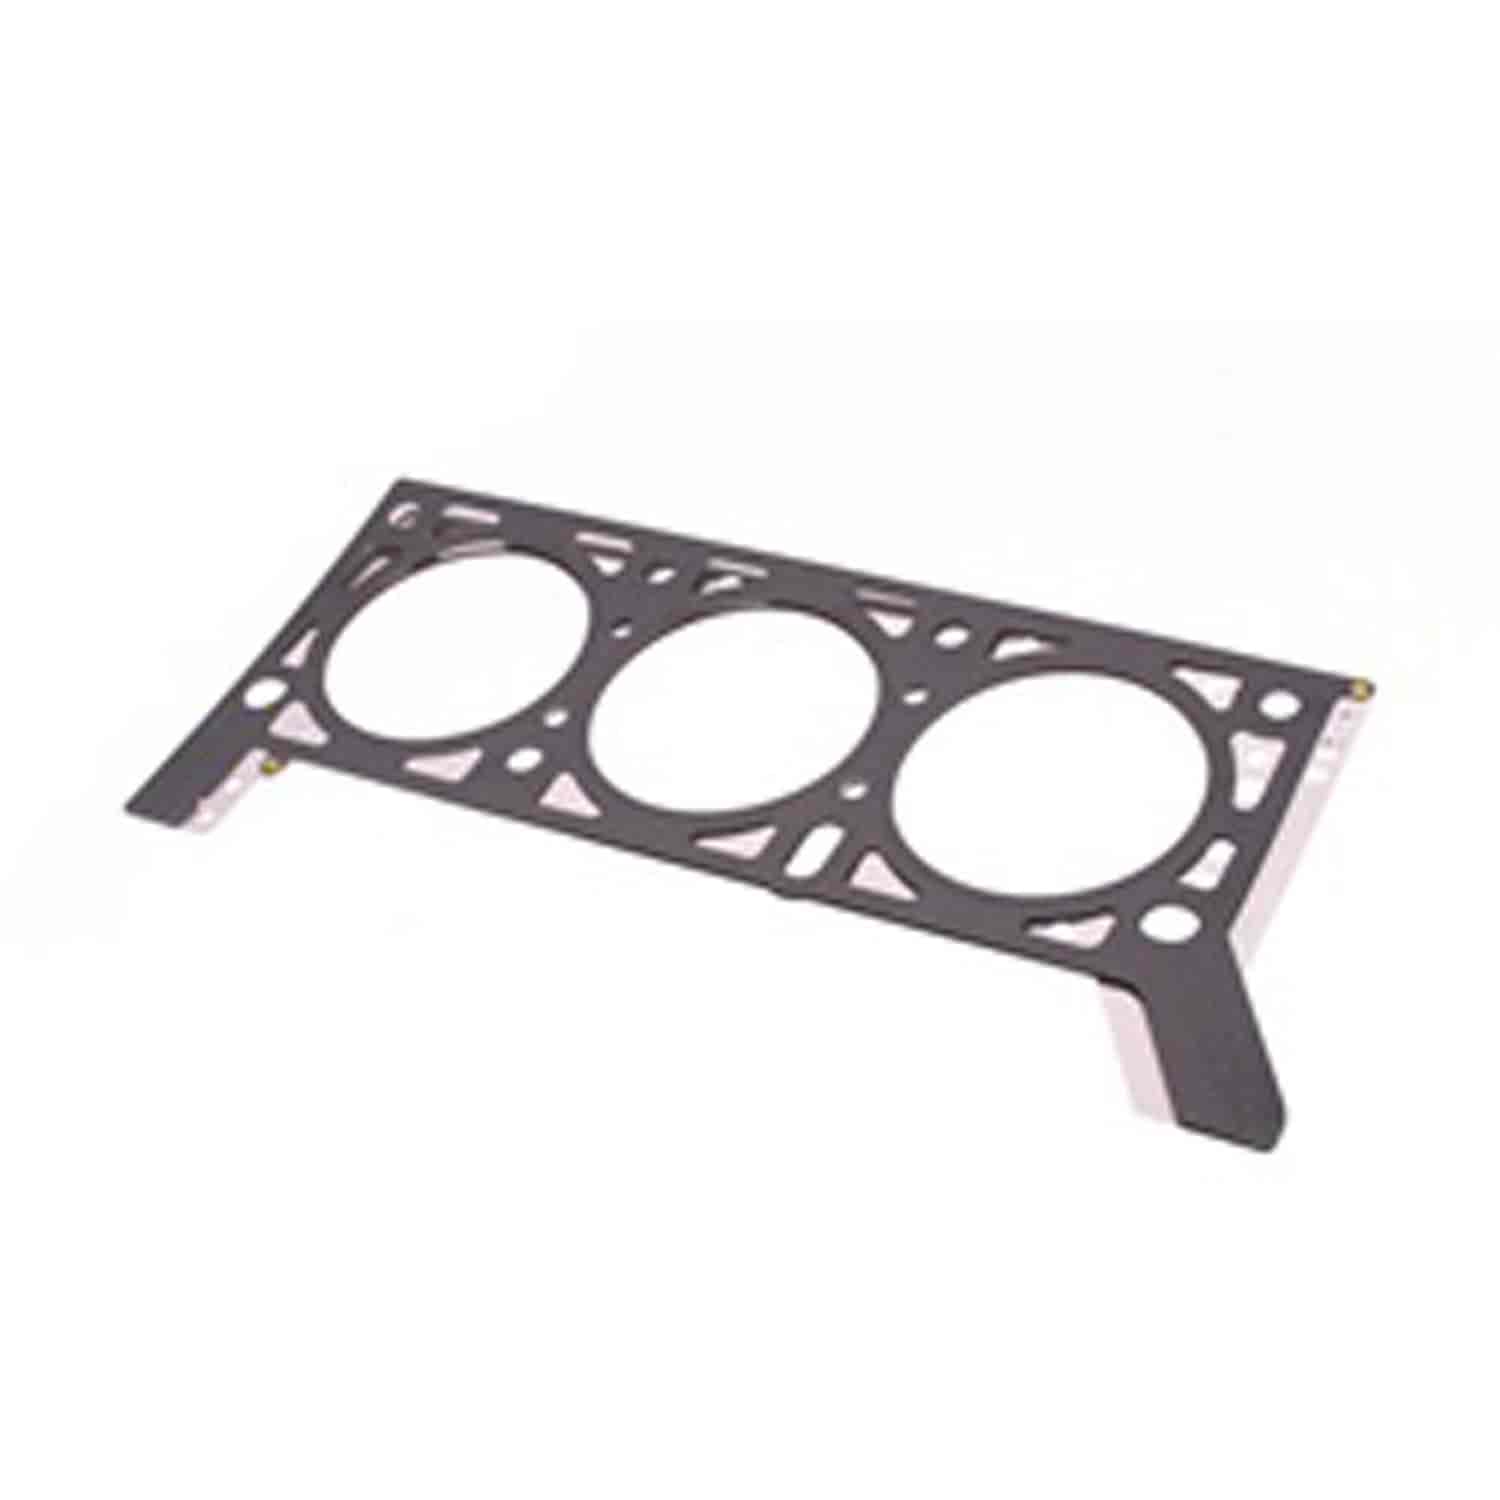 This cylinder head gasket from Omix-ADA fits the right side on 3.8 liter engines. Fits 07-11 Jeep Wrangler.